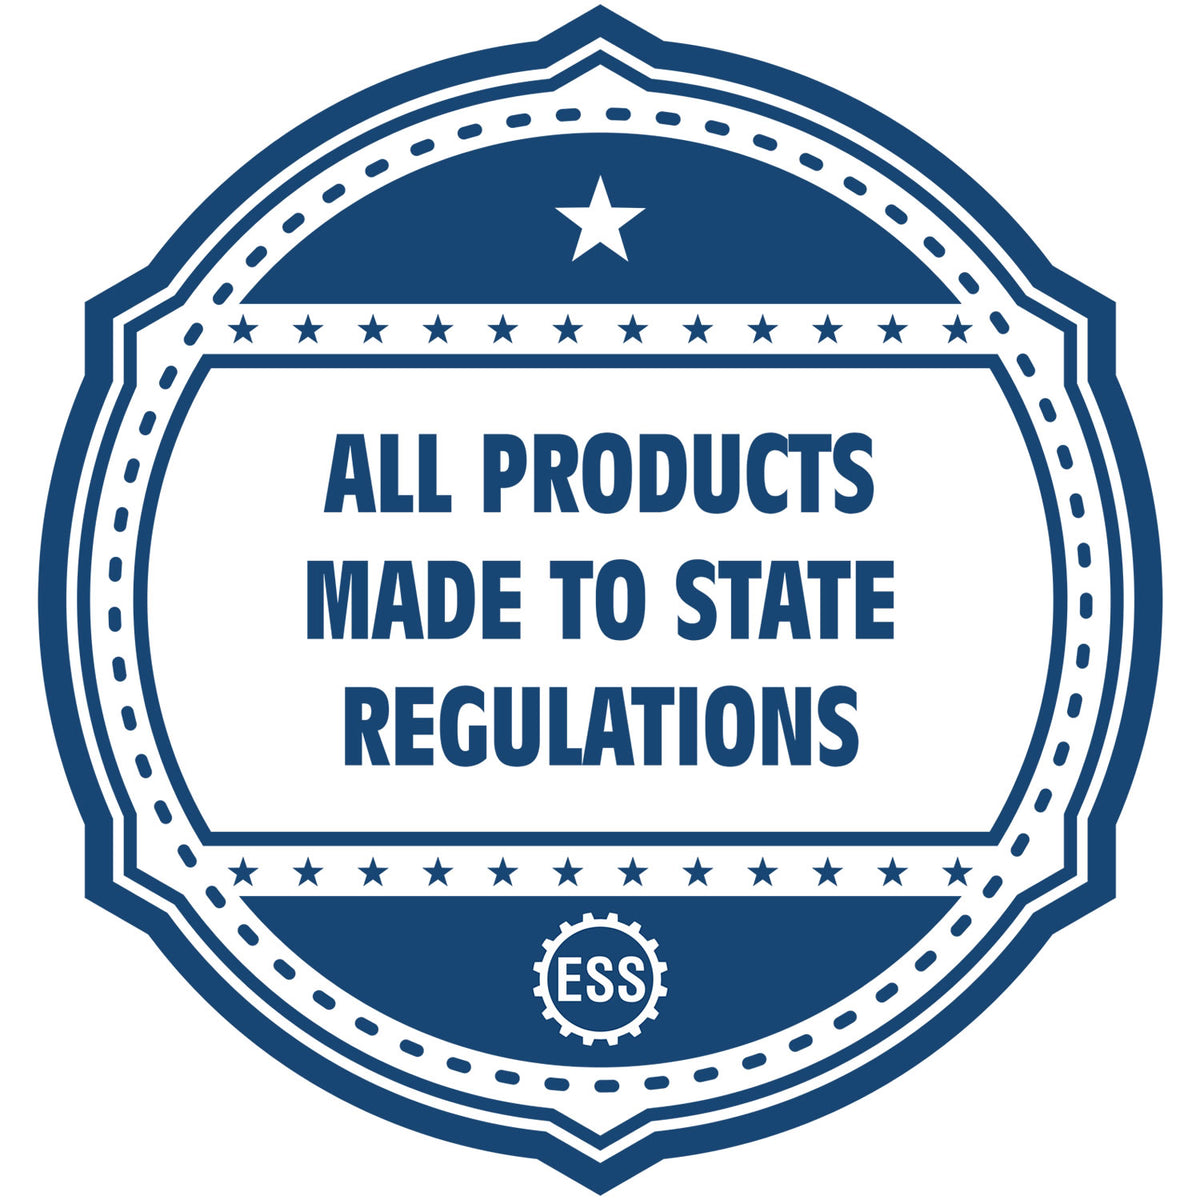 An icon or badge element for the Slim Pre-Inked New Jersey Professional Engineer Seal Stamp showing that this product is made in compliance with state regulations.